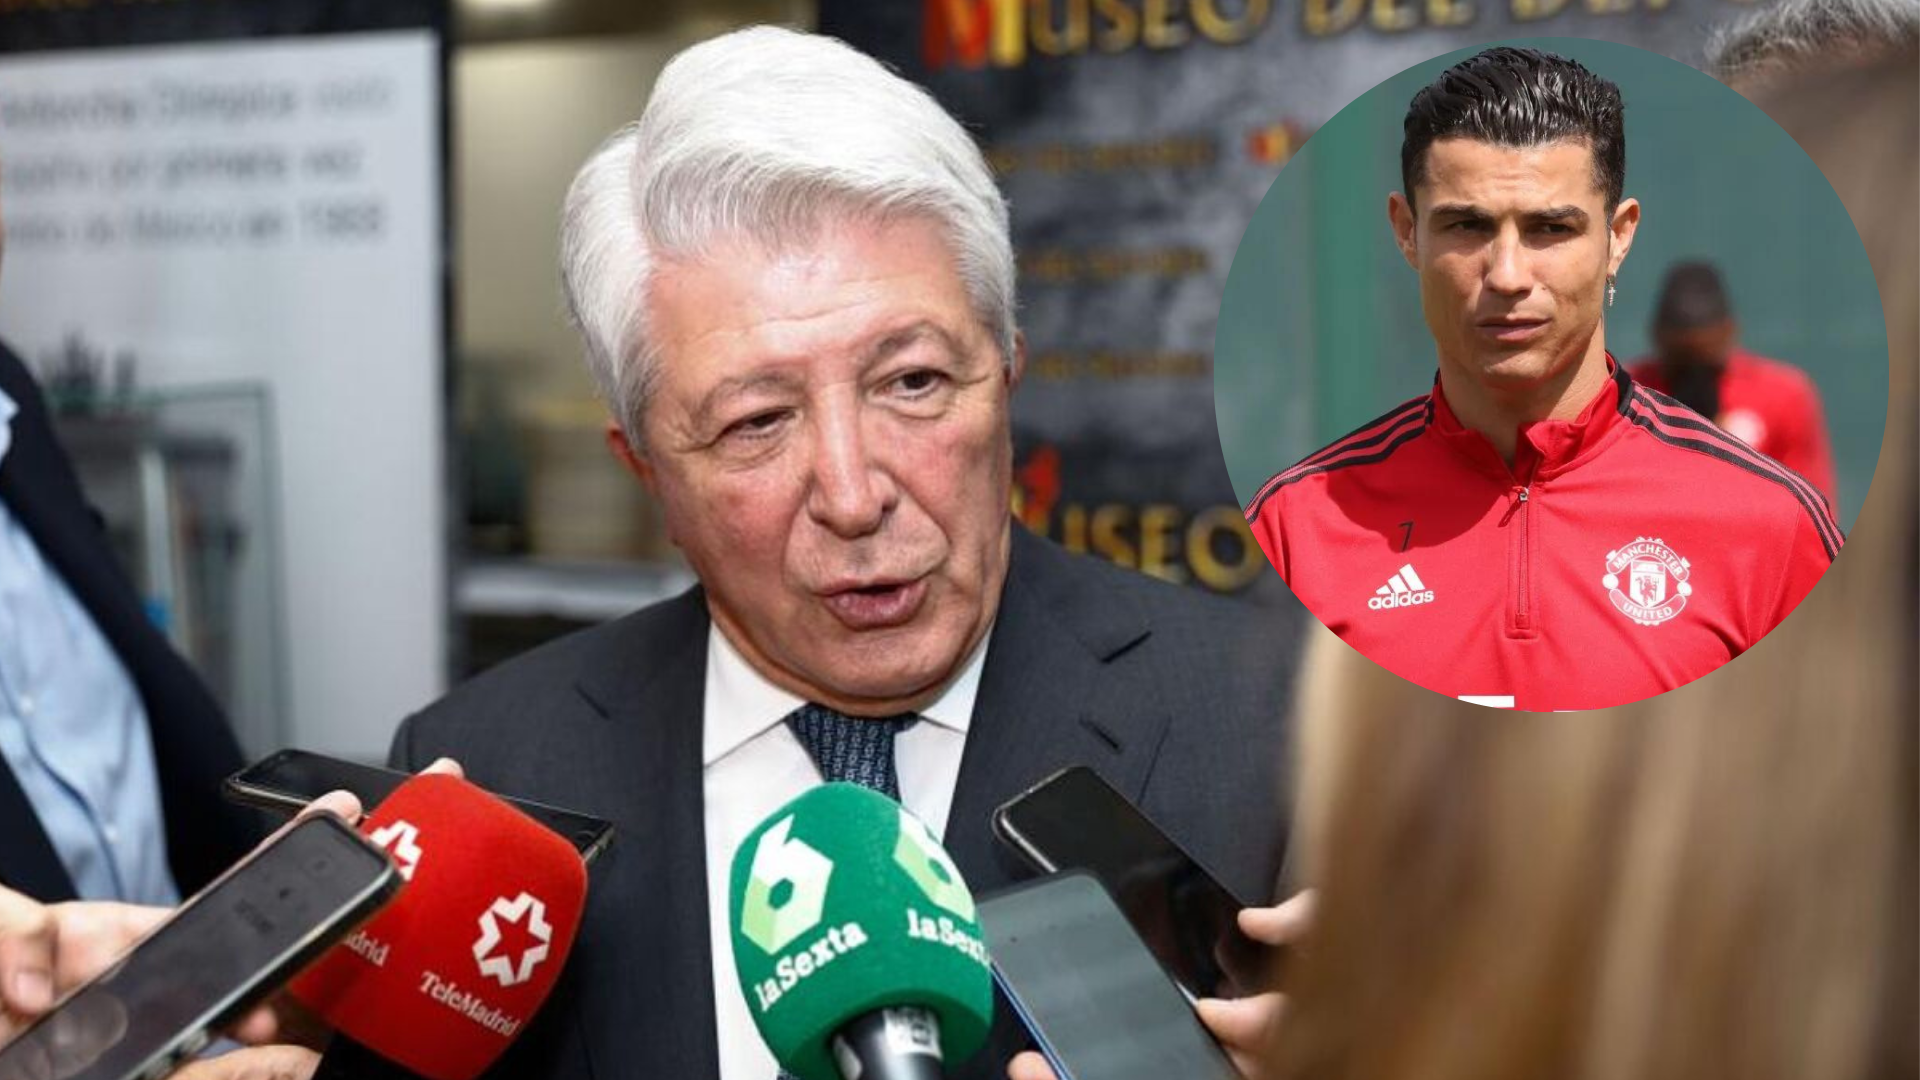  Enrique Cerezo being interviewed by the press with Cristiano Ronaldo on the upper right corner